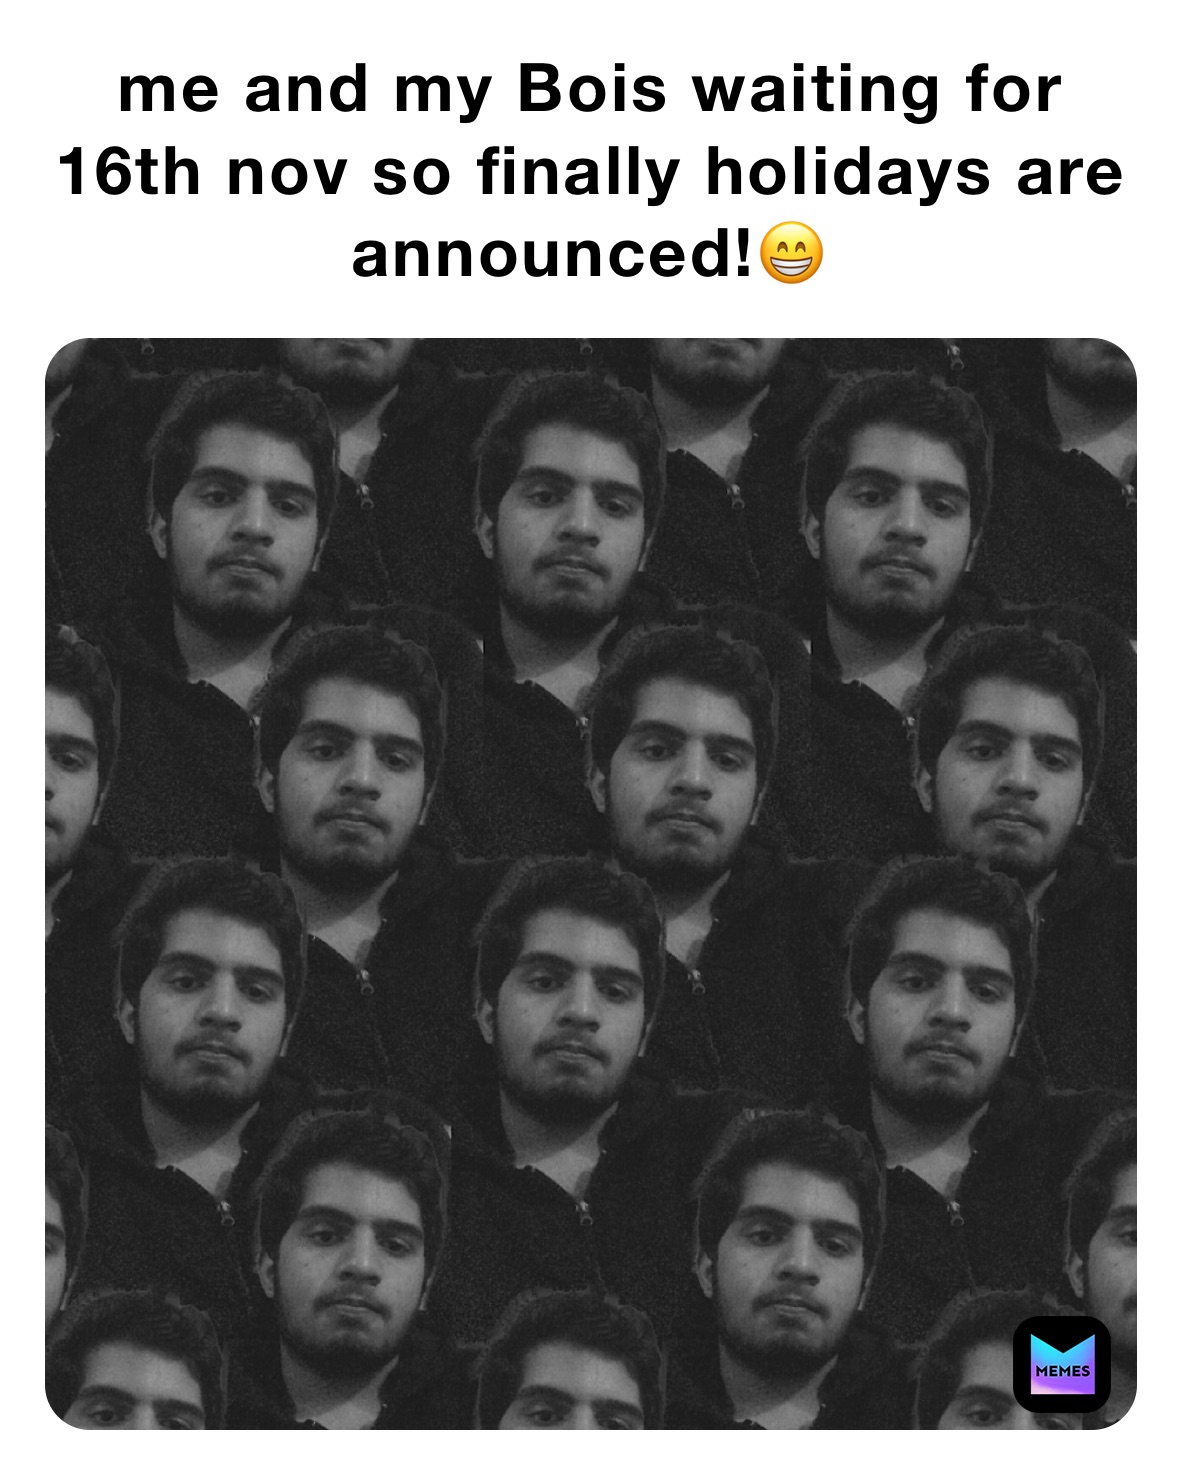 me and my Bois waiting for 16th nov so finally holidays are announced!😁